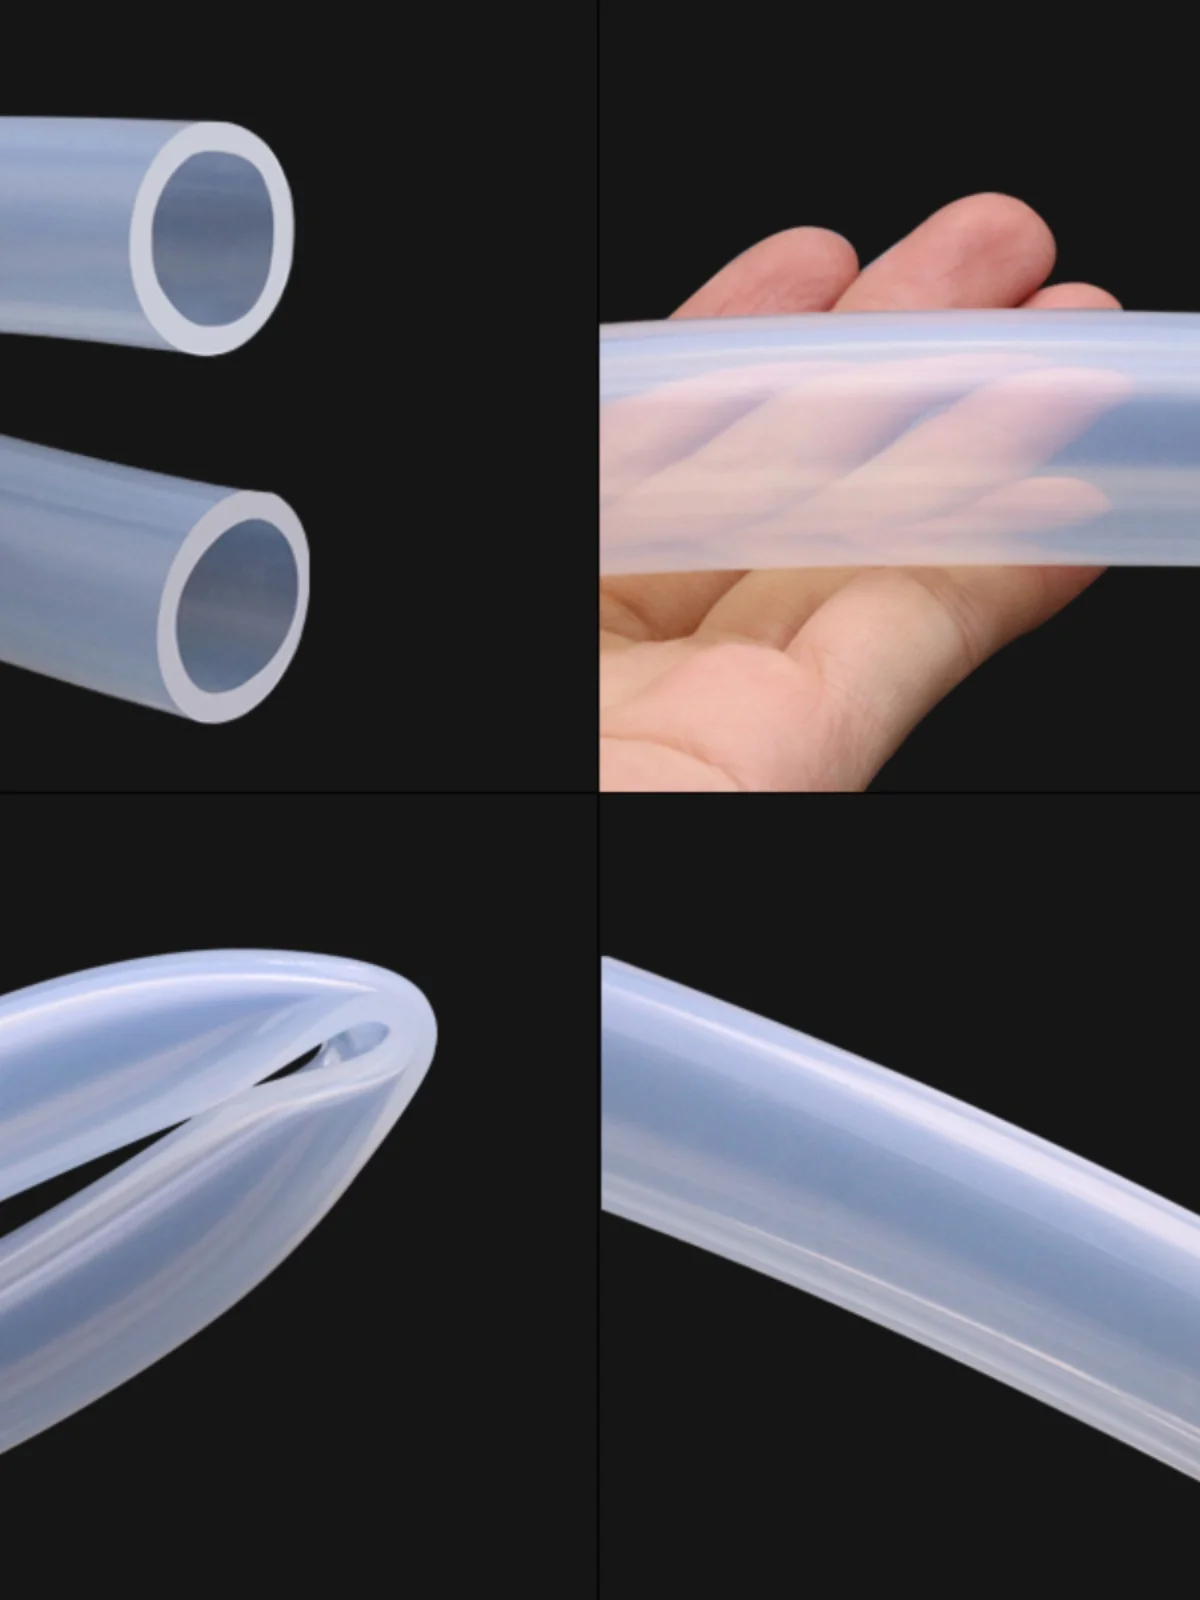 1M Food Grade Silicone Rubber Hose Transparent Flexible Silicone Tube Diameter 0.5 1 1.5 2 2.5 3 4 5 6 7 8  10  12 mm Clear Tube 3 5m food grade clear silicone rubber hose od 1 2 3 4 5 6 7 8 9 10 11 12 14 16 18 25 32 50mm flexible transparent silicone tube